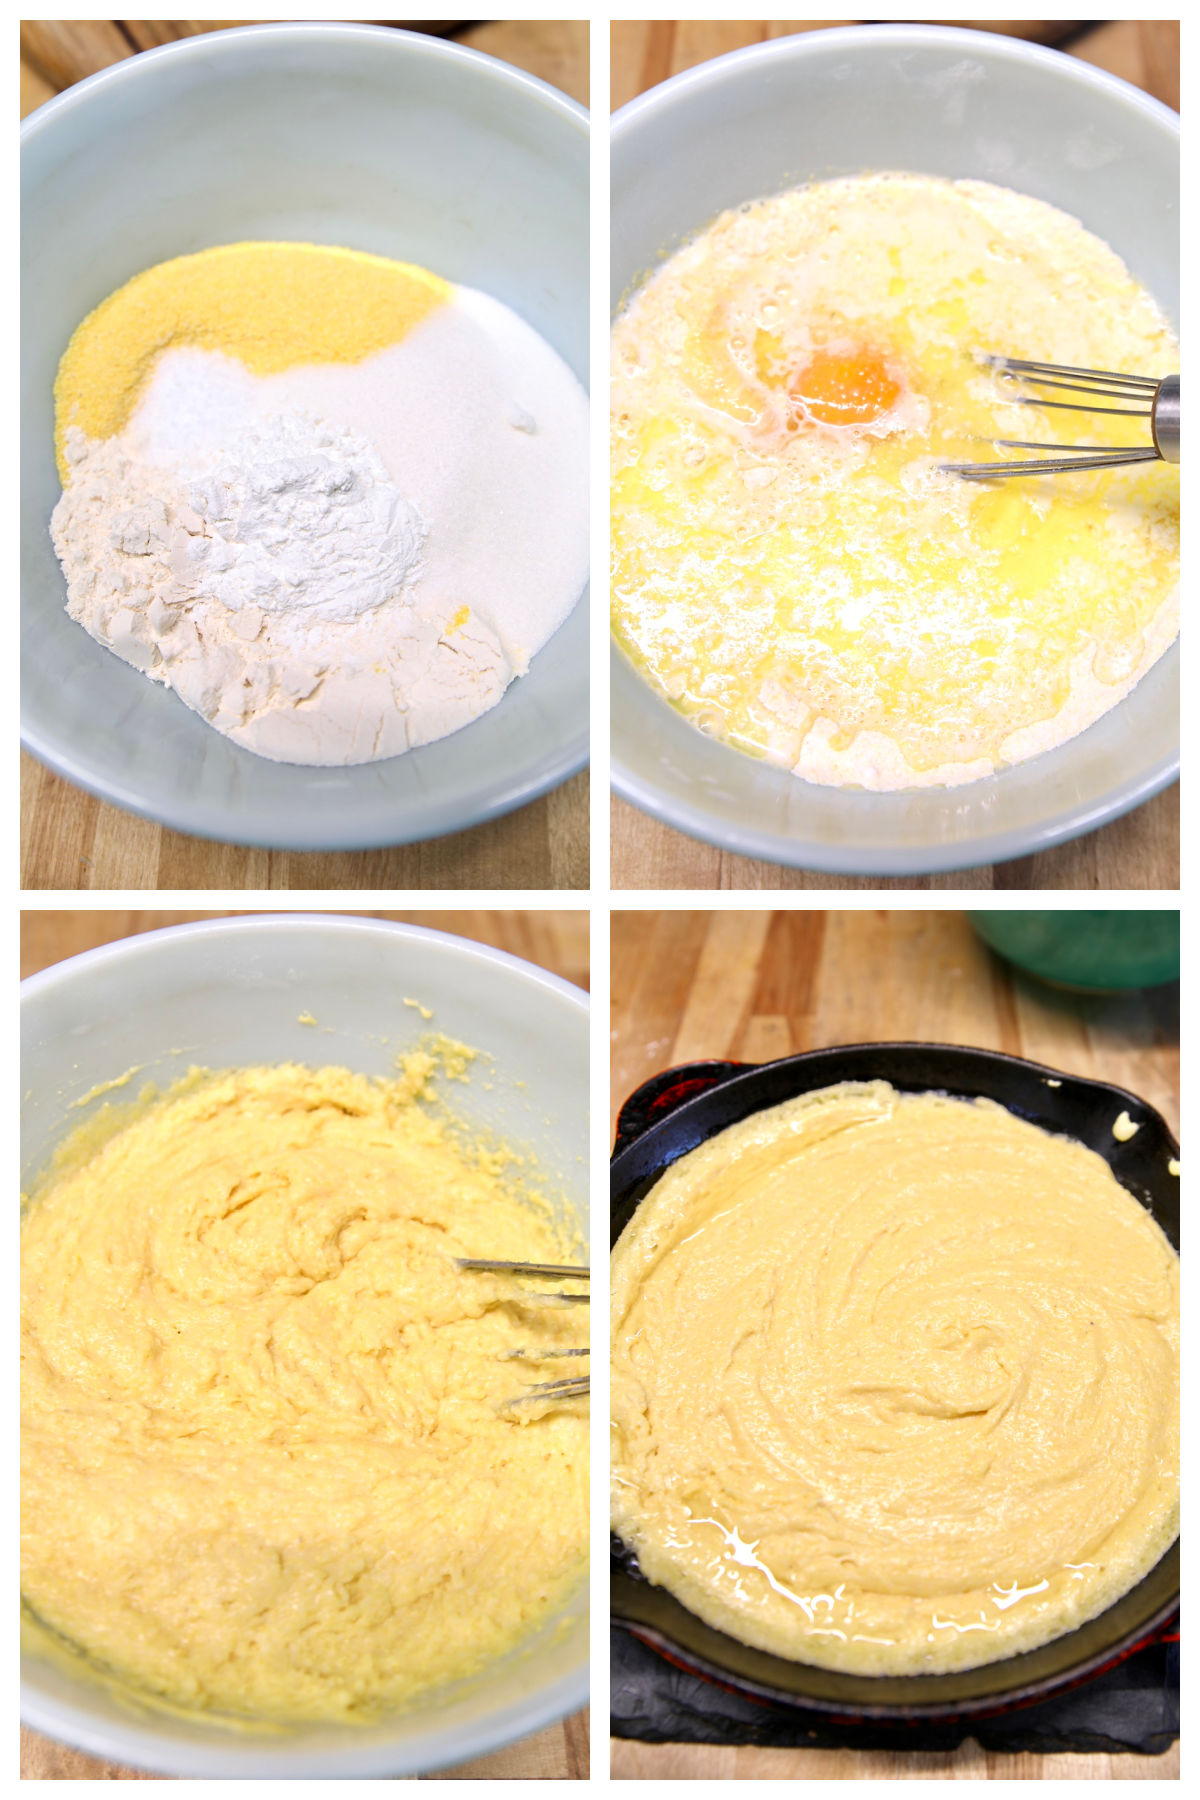 Collage mixing cornbread batter in a bowl, placing in skillet.